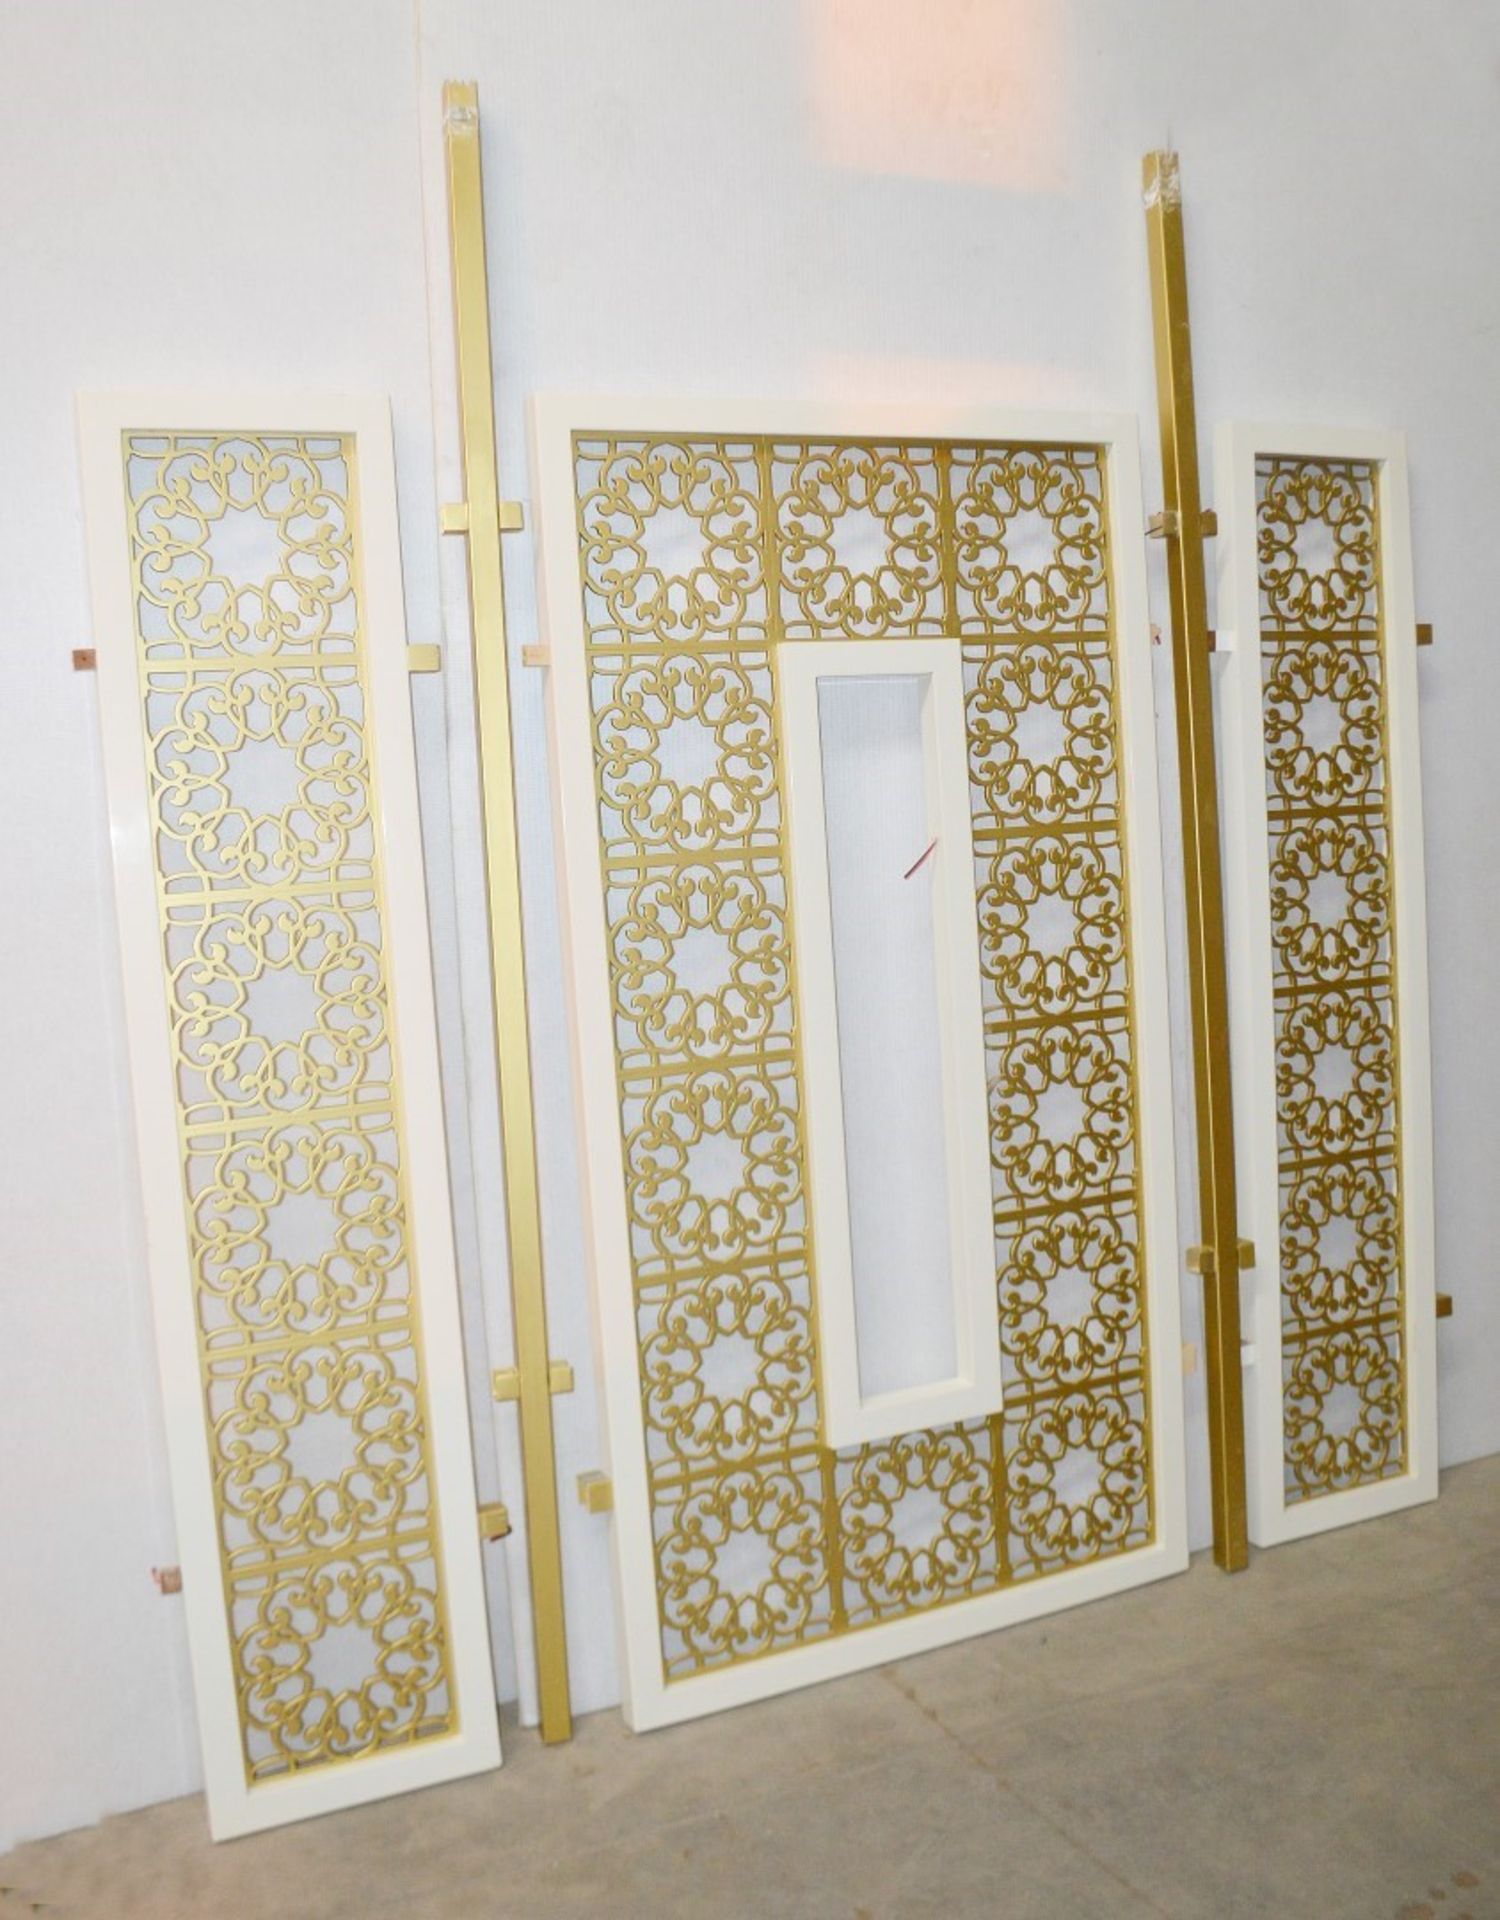 A Set Of 3 x Moroccan-style Room Divider Screen Panels - Ref: HMS108 - CL668 - Location: - Image 5 of 10